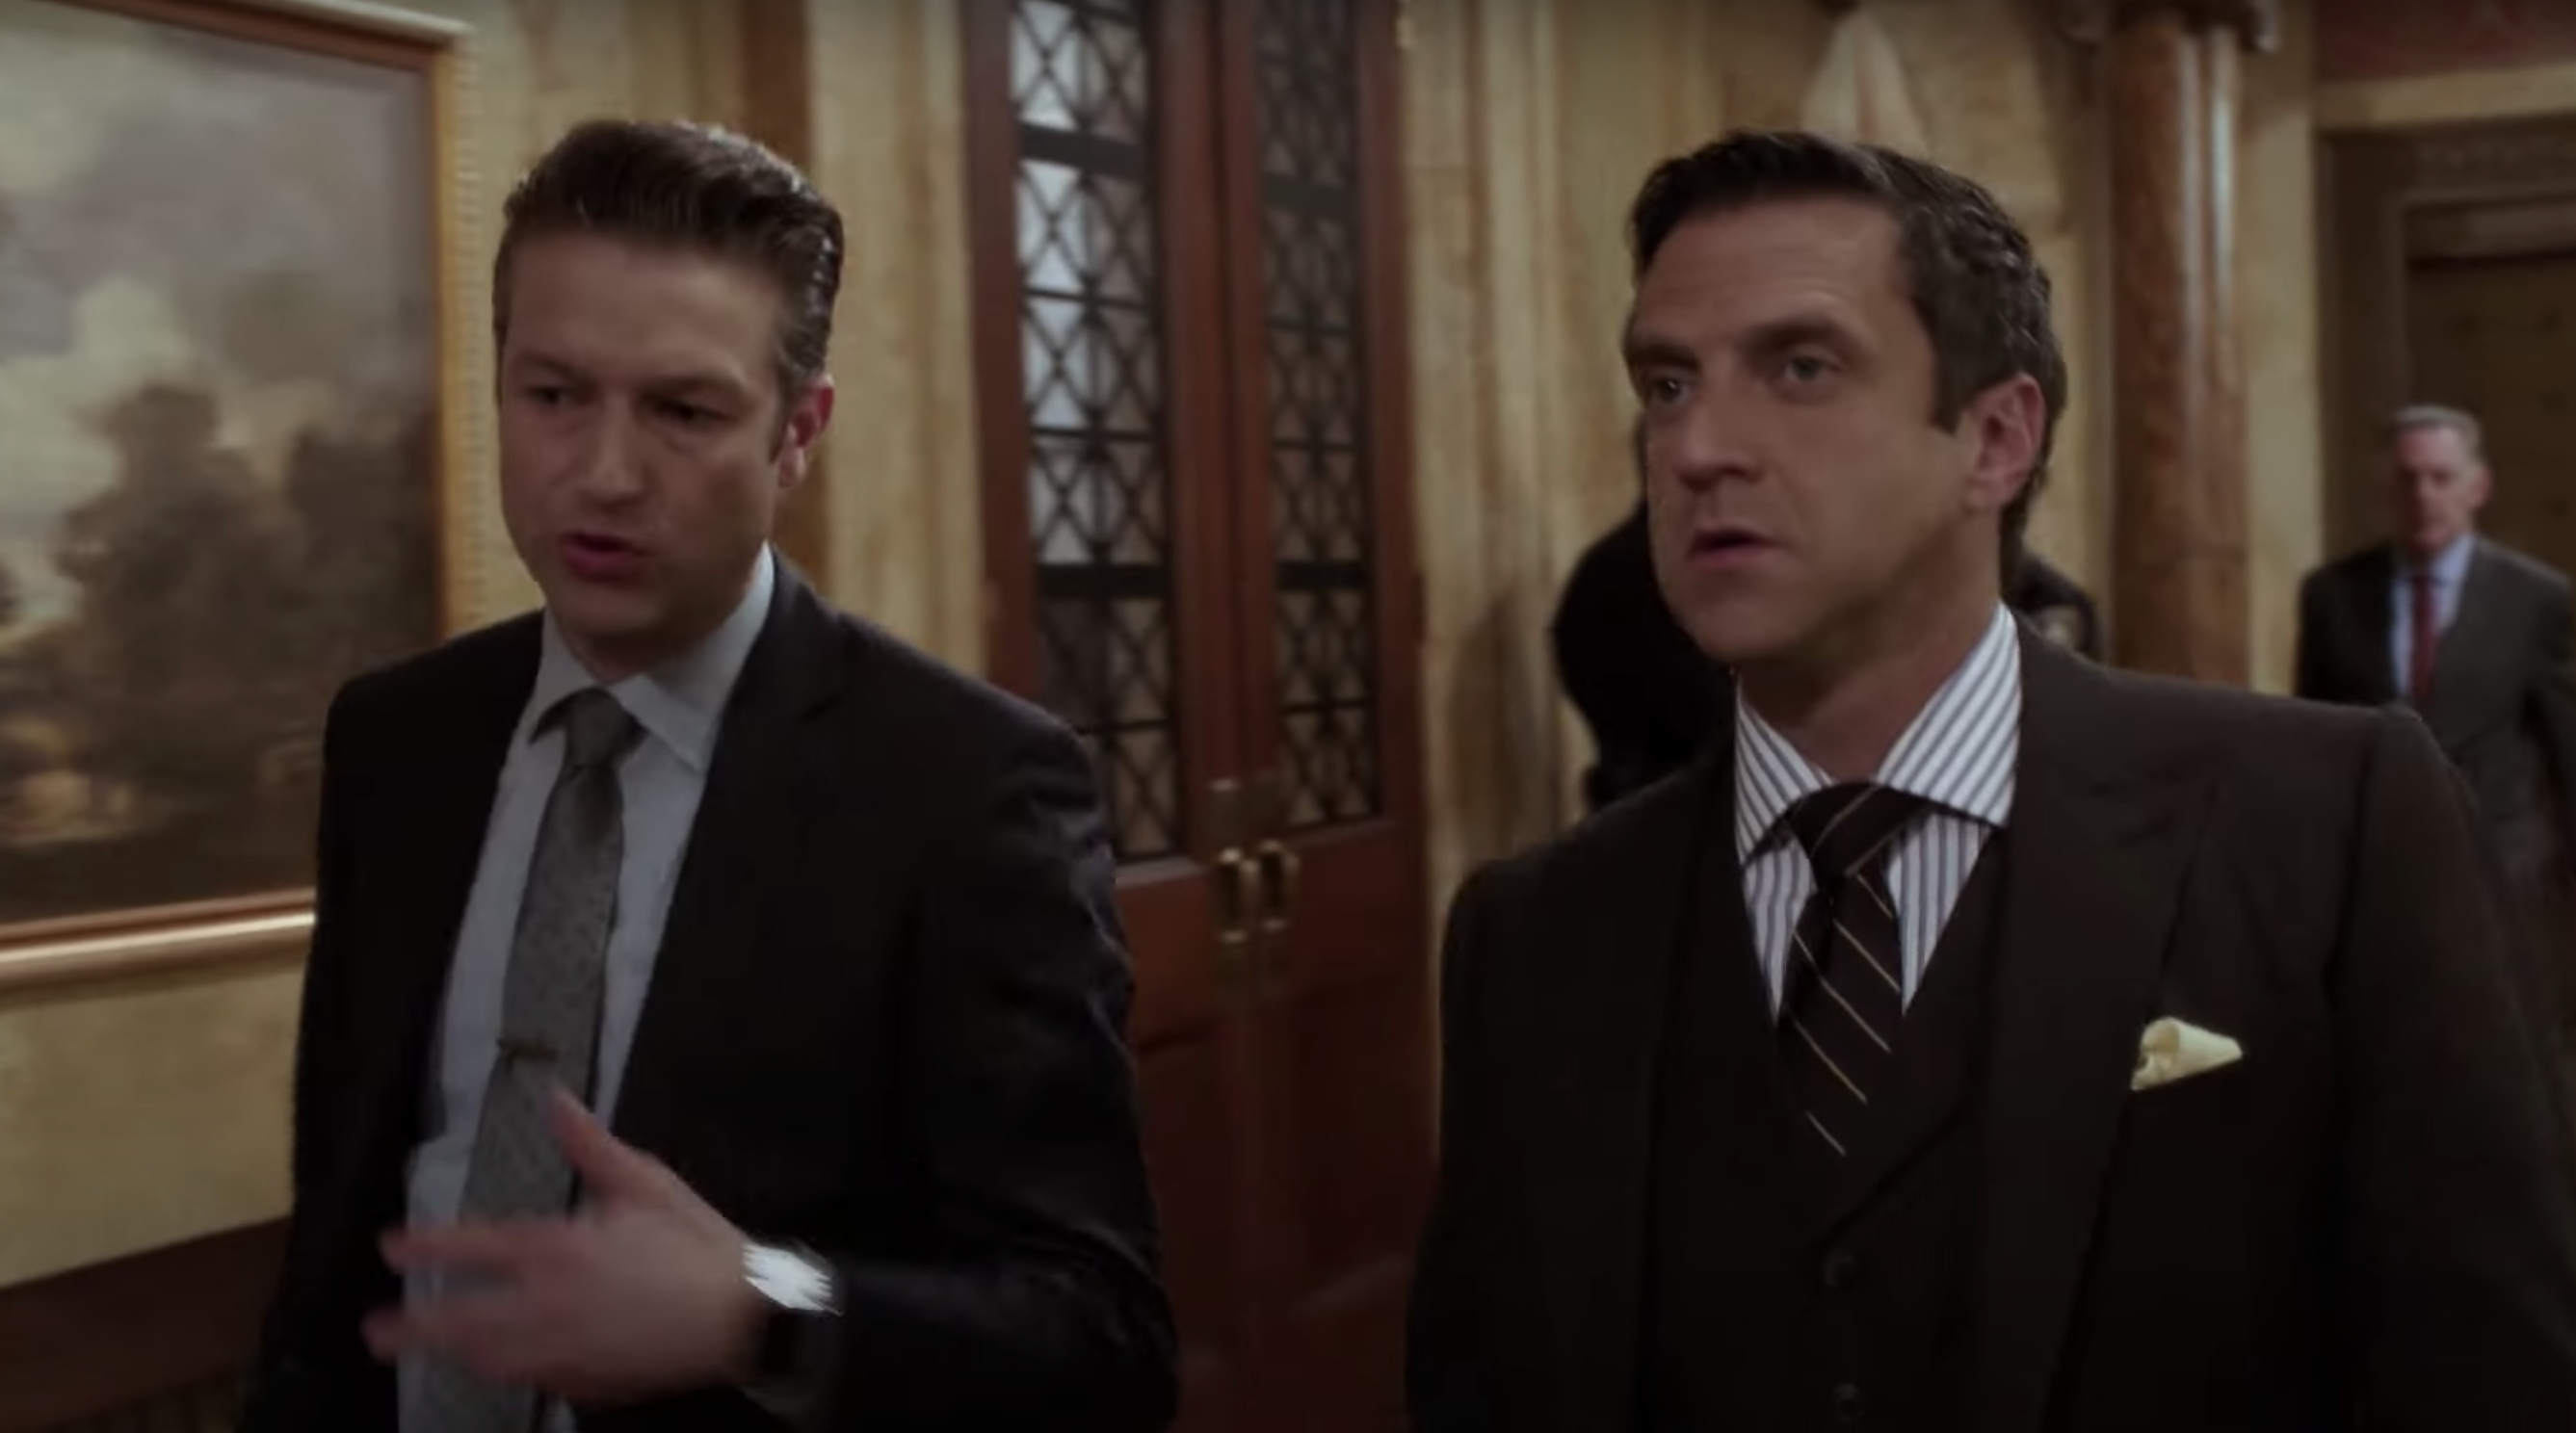 Sonny and Rafael walking in a courtroom building